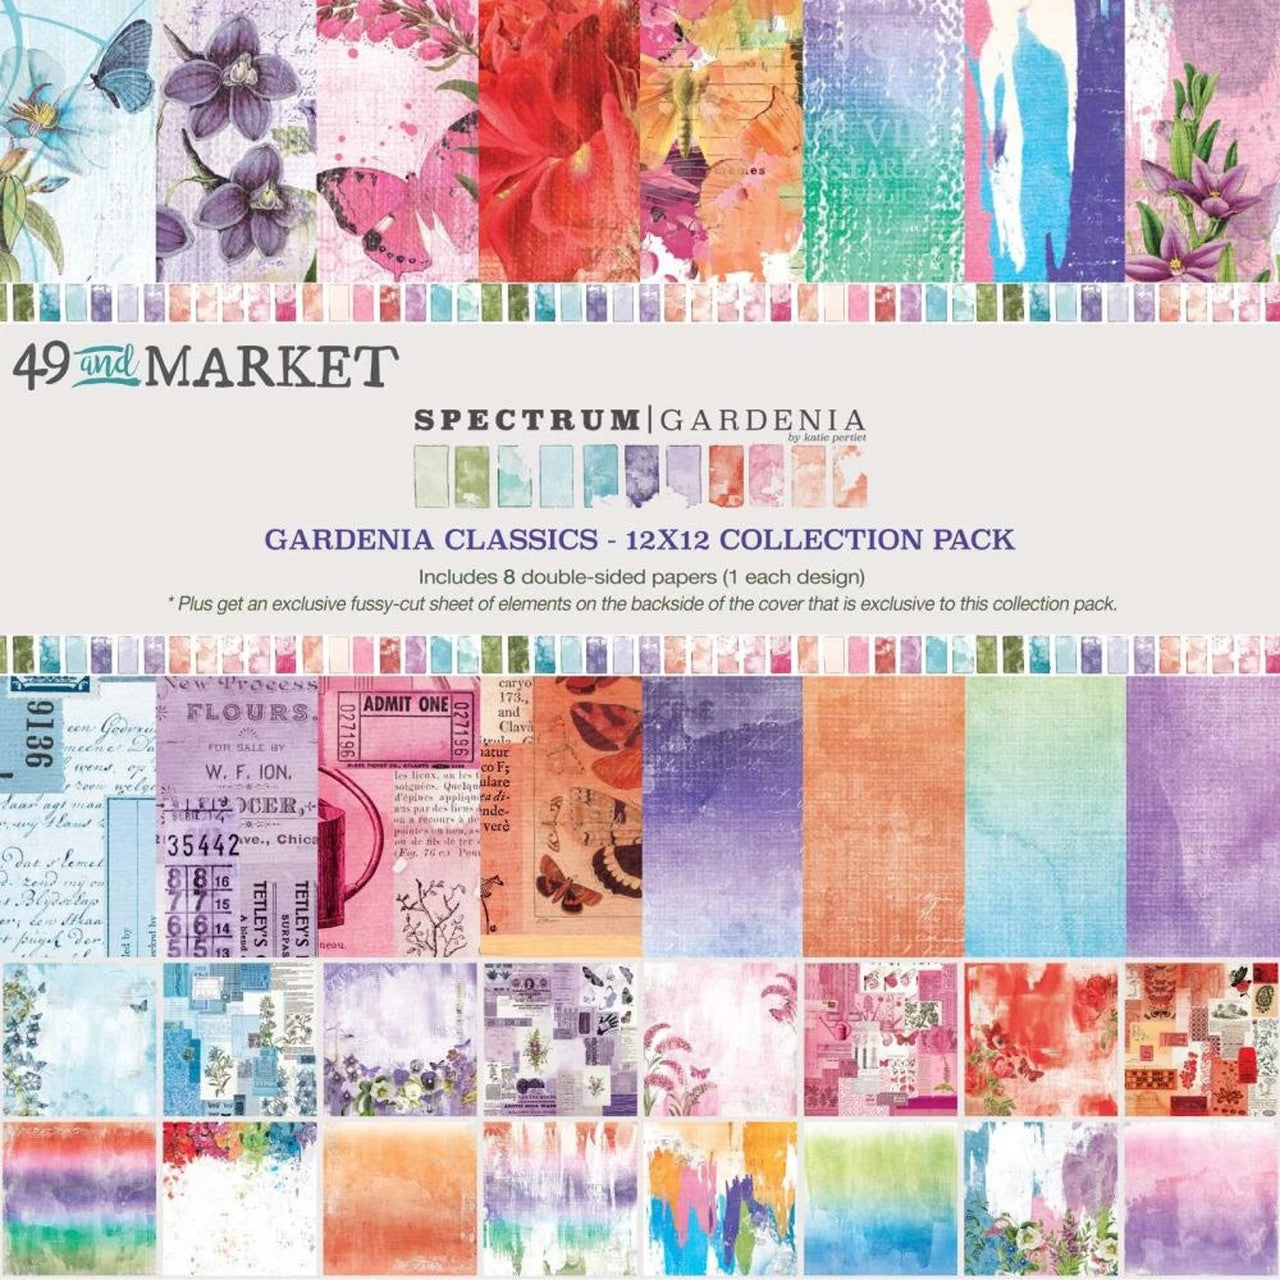 49 and  Market Spectrum Gardenia 12x12 Classic Collection Pack